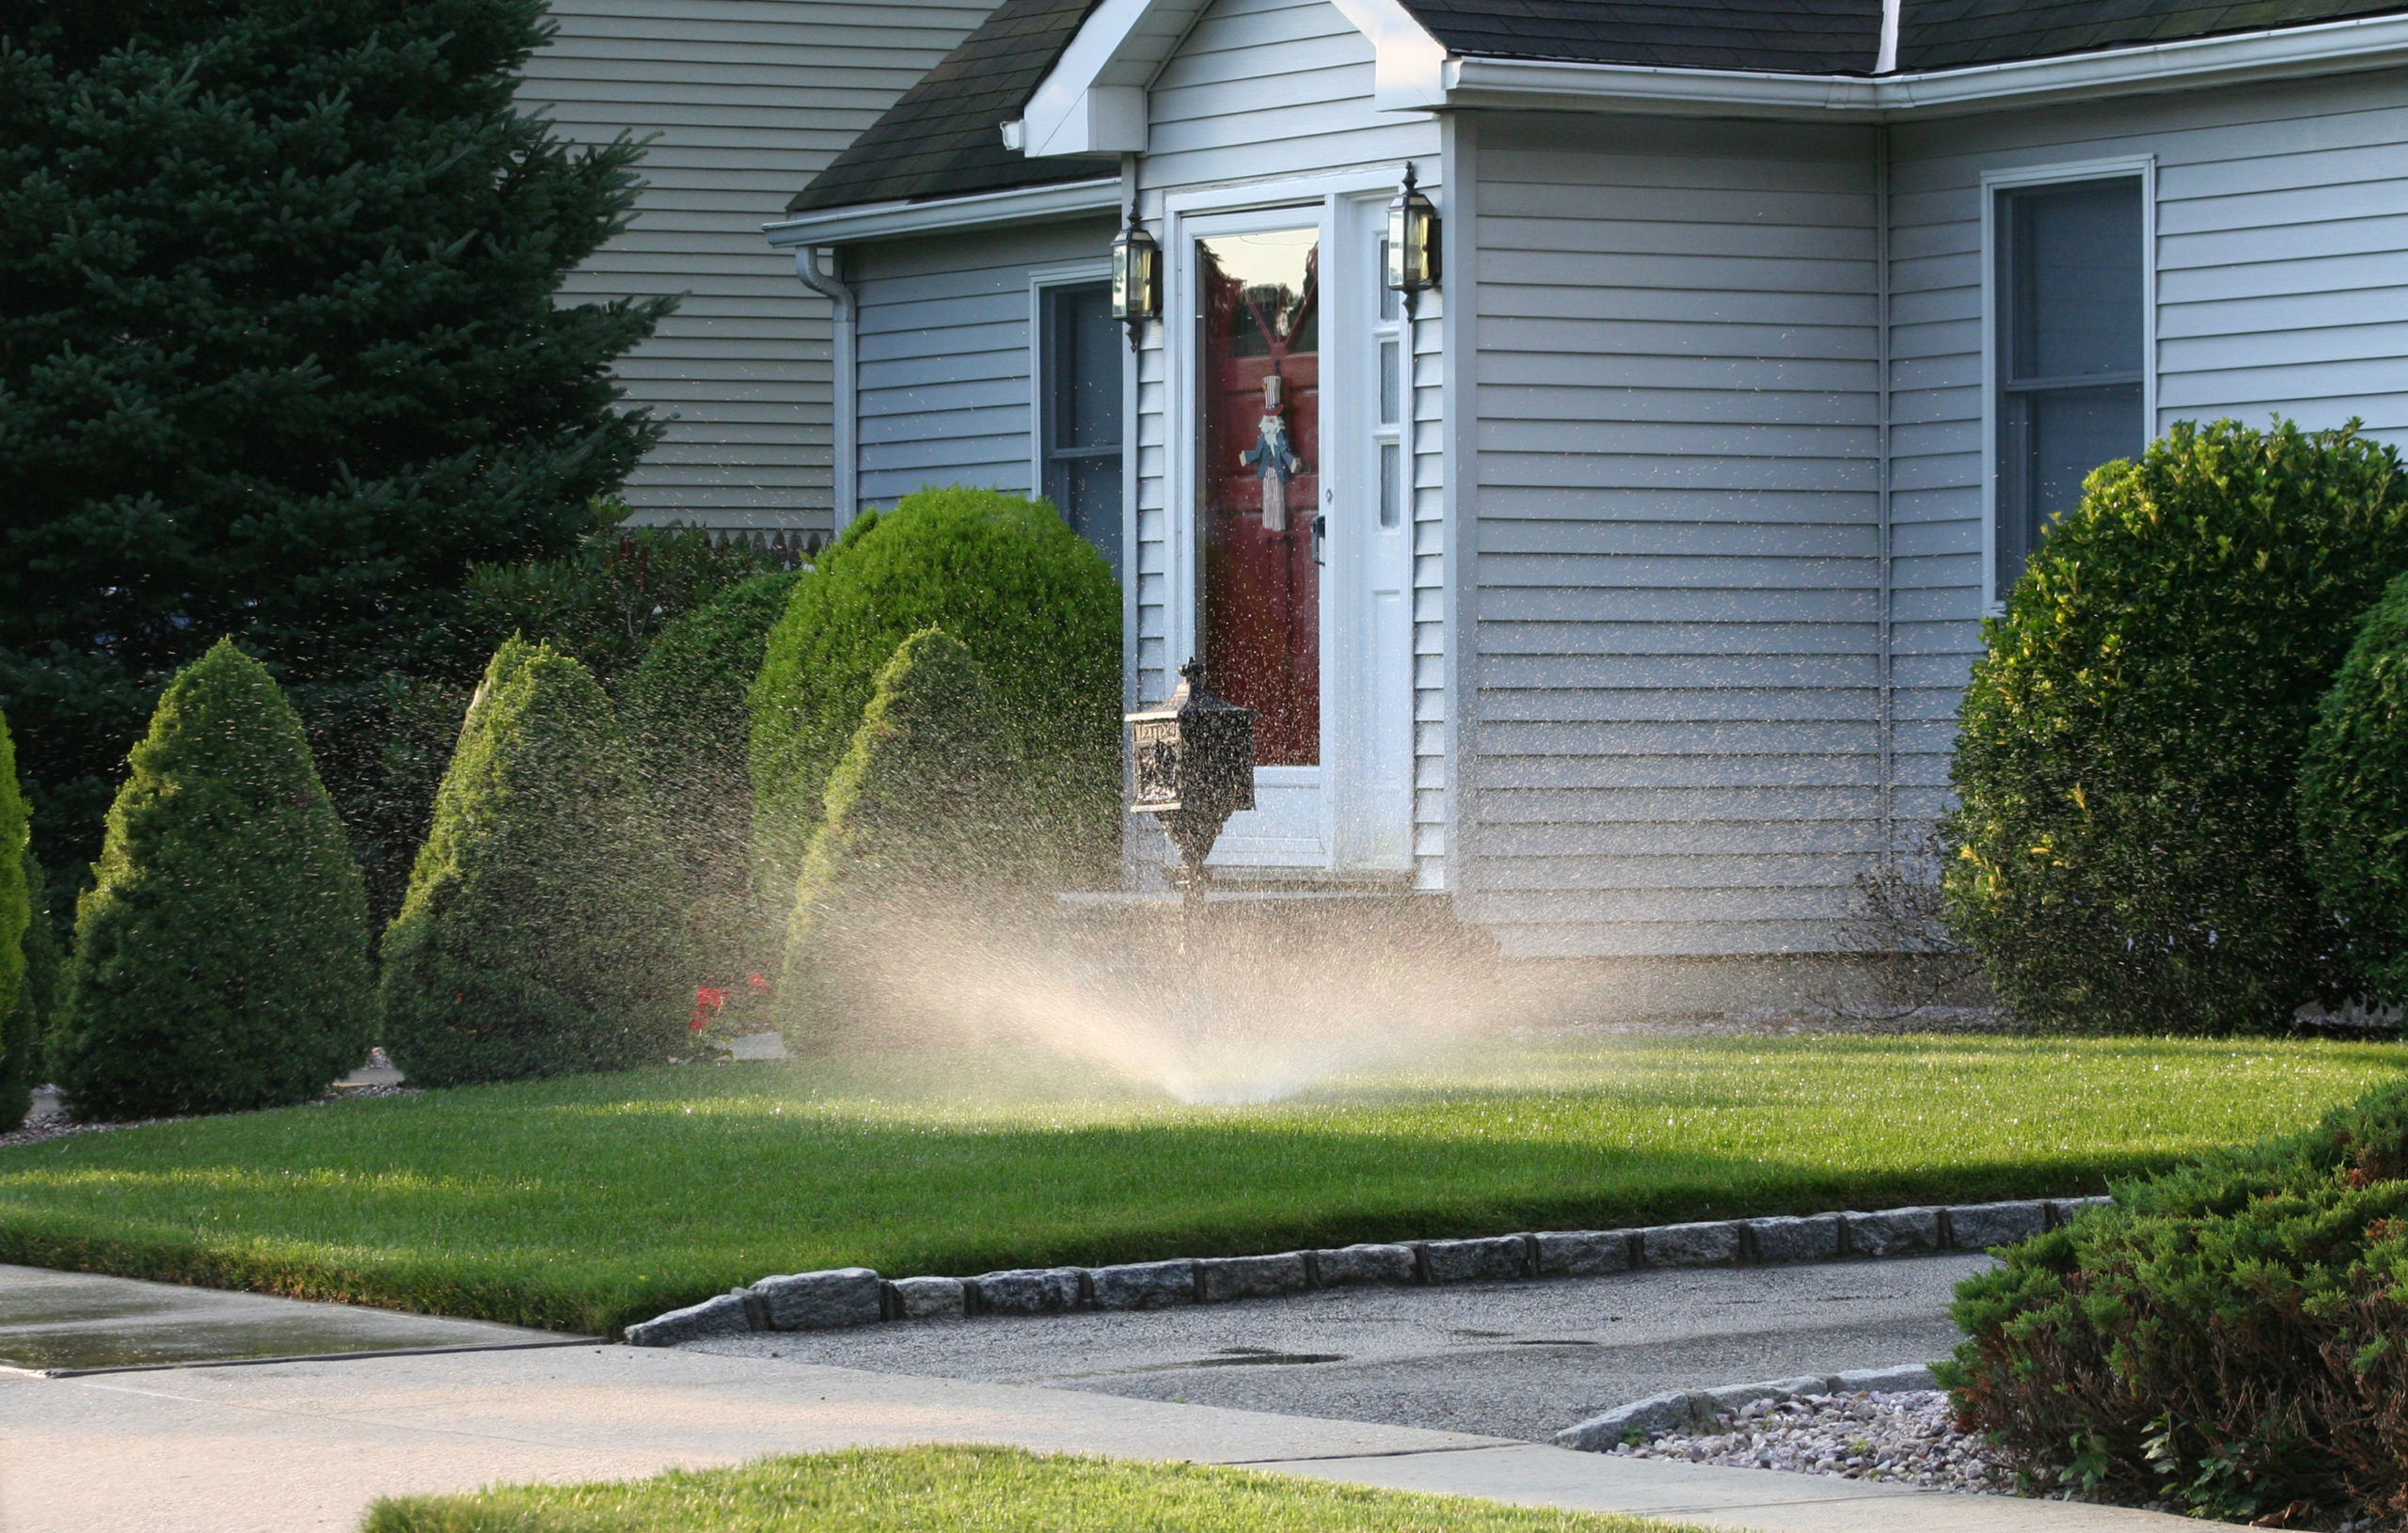 A sprinkler spraying a lawn in the morning, in Georgia.